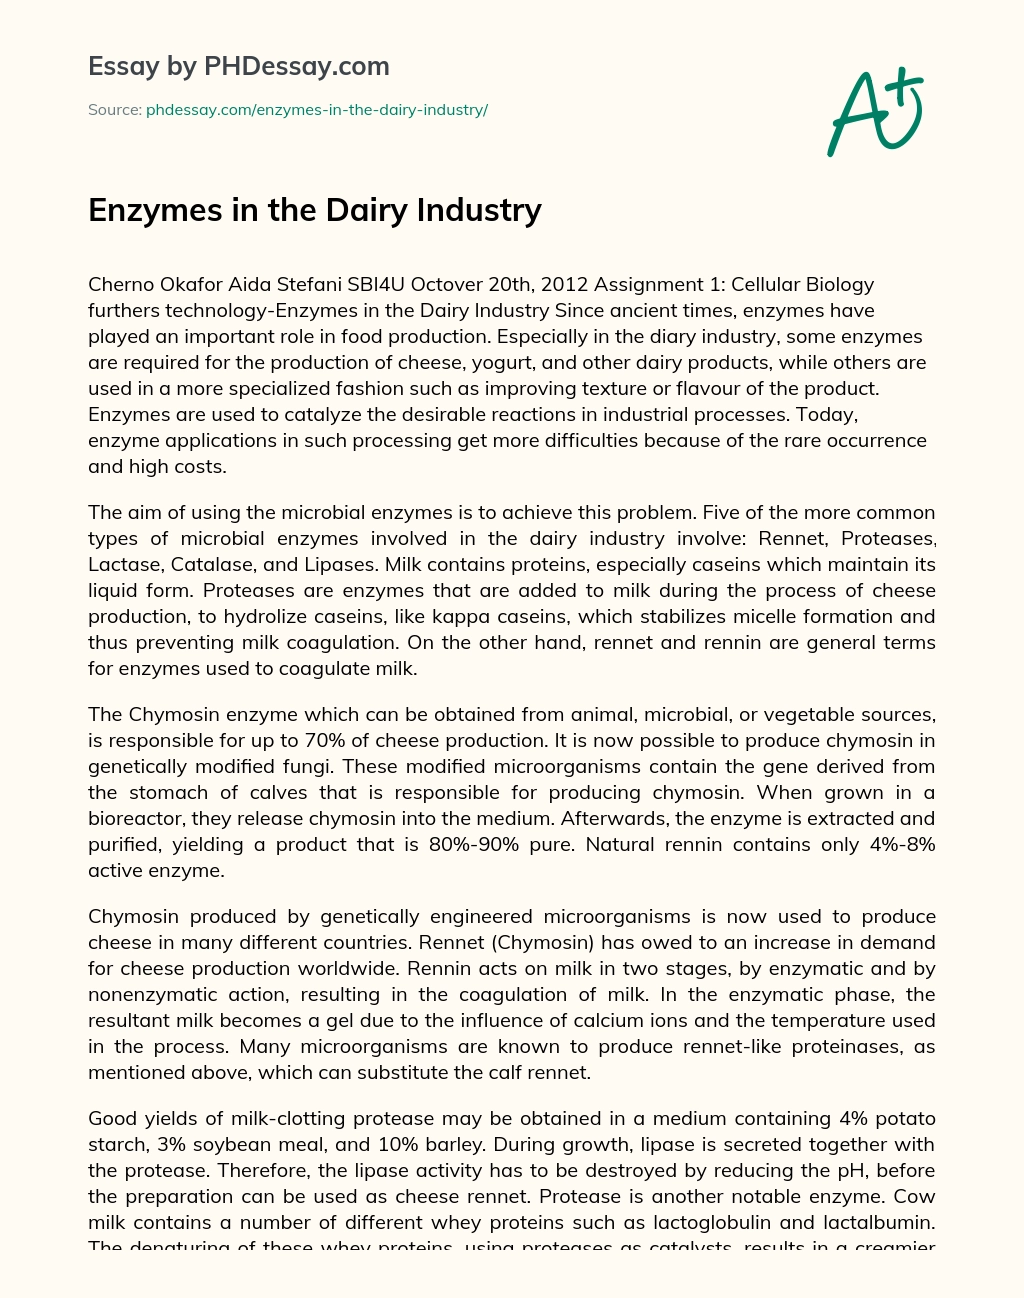 Enzymes in the Dairy Industry essay